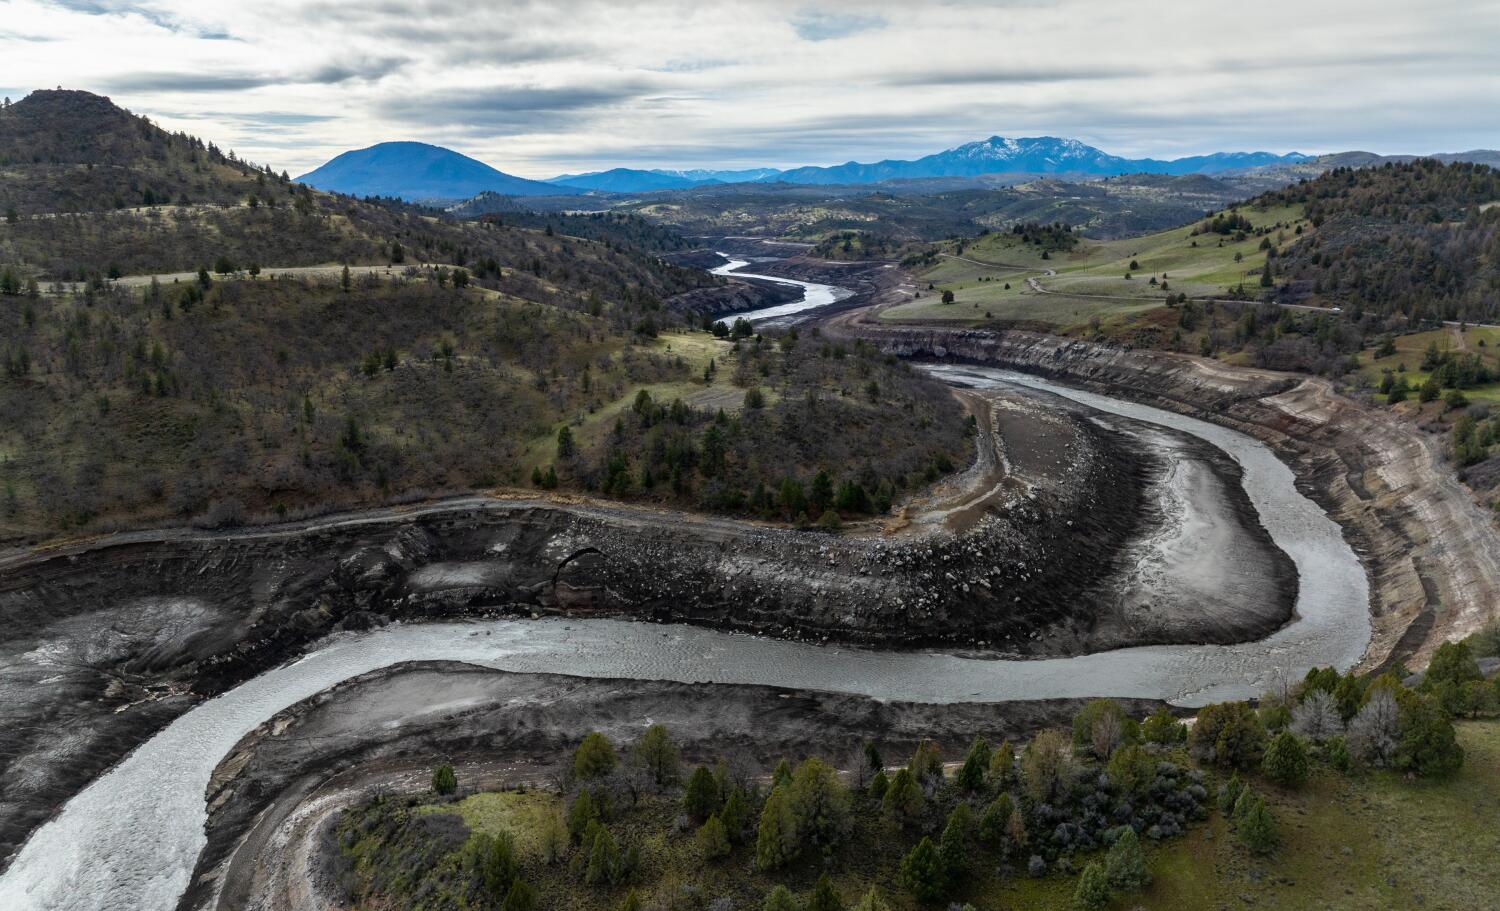 The Klamath River's dams are being removed. Inside the effort to restore a scarred watershed